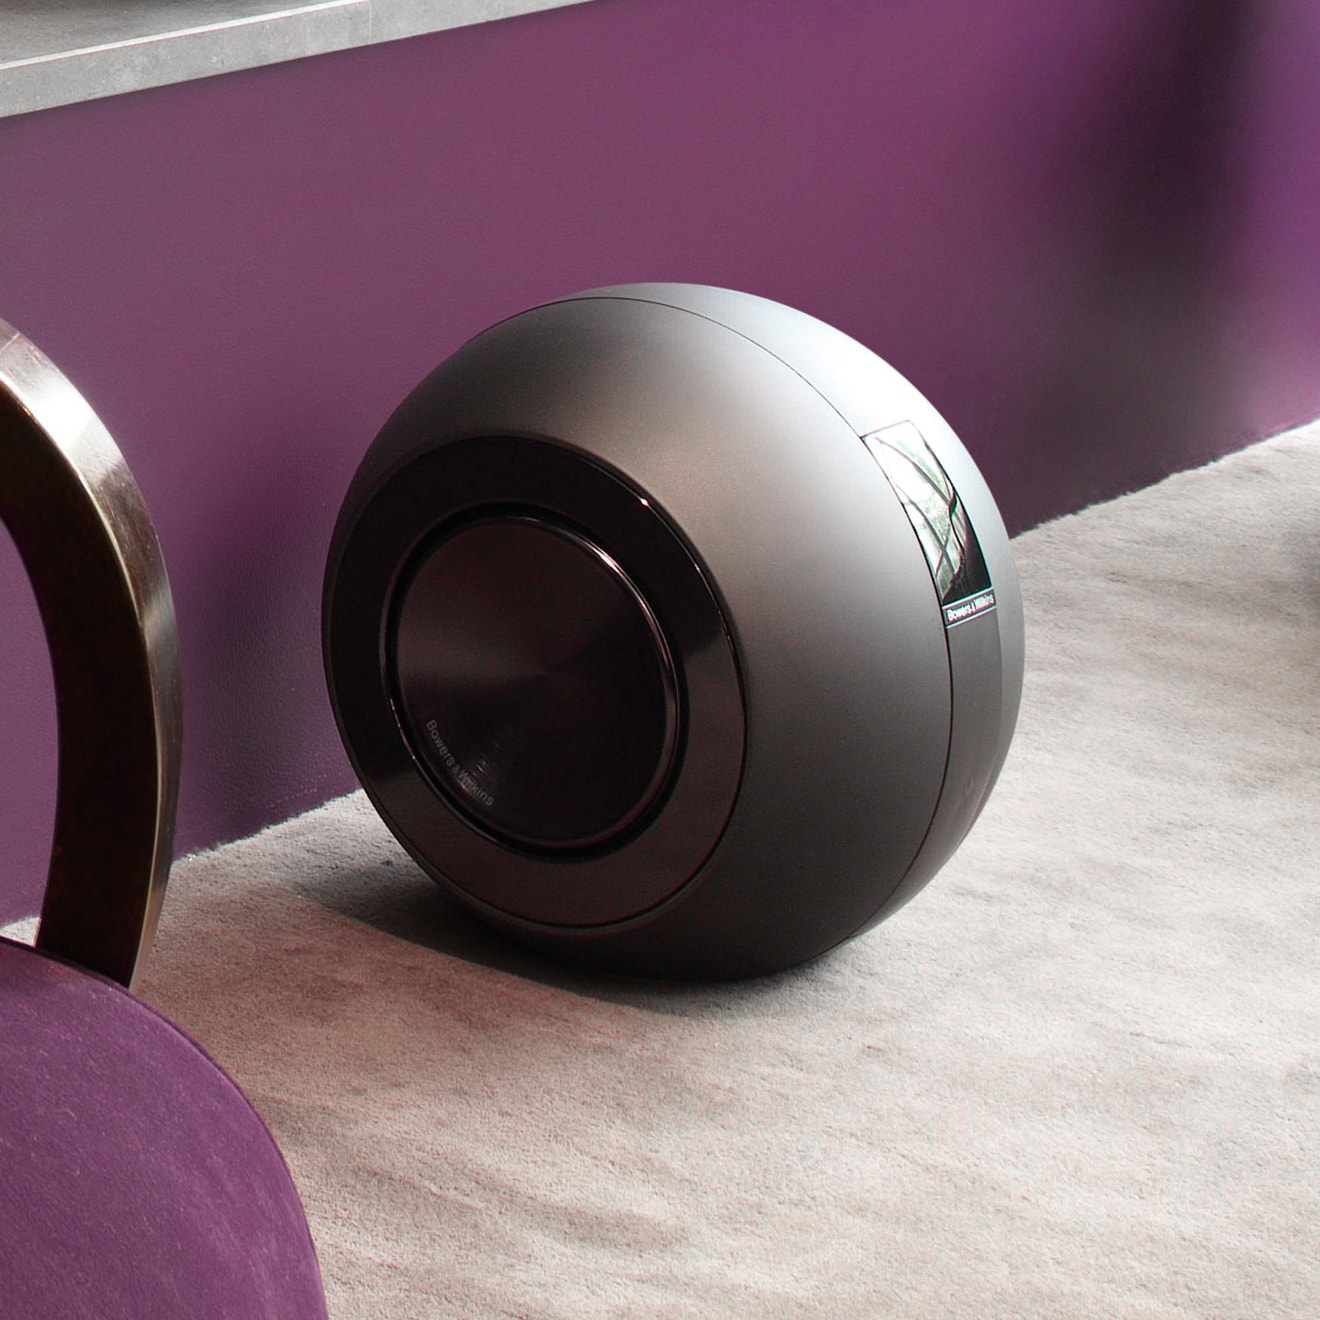 deres skillevæg Fascinate Bowers & Wilkins PV1D (B) Subwoofer With Two Opposed Drivers -